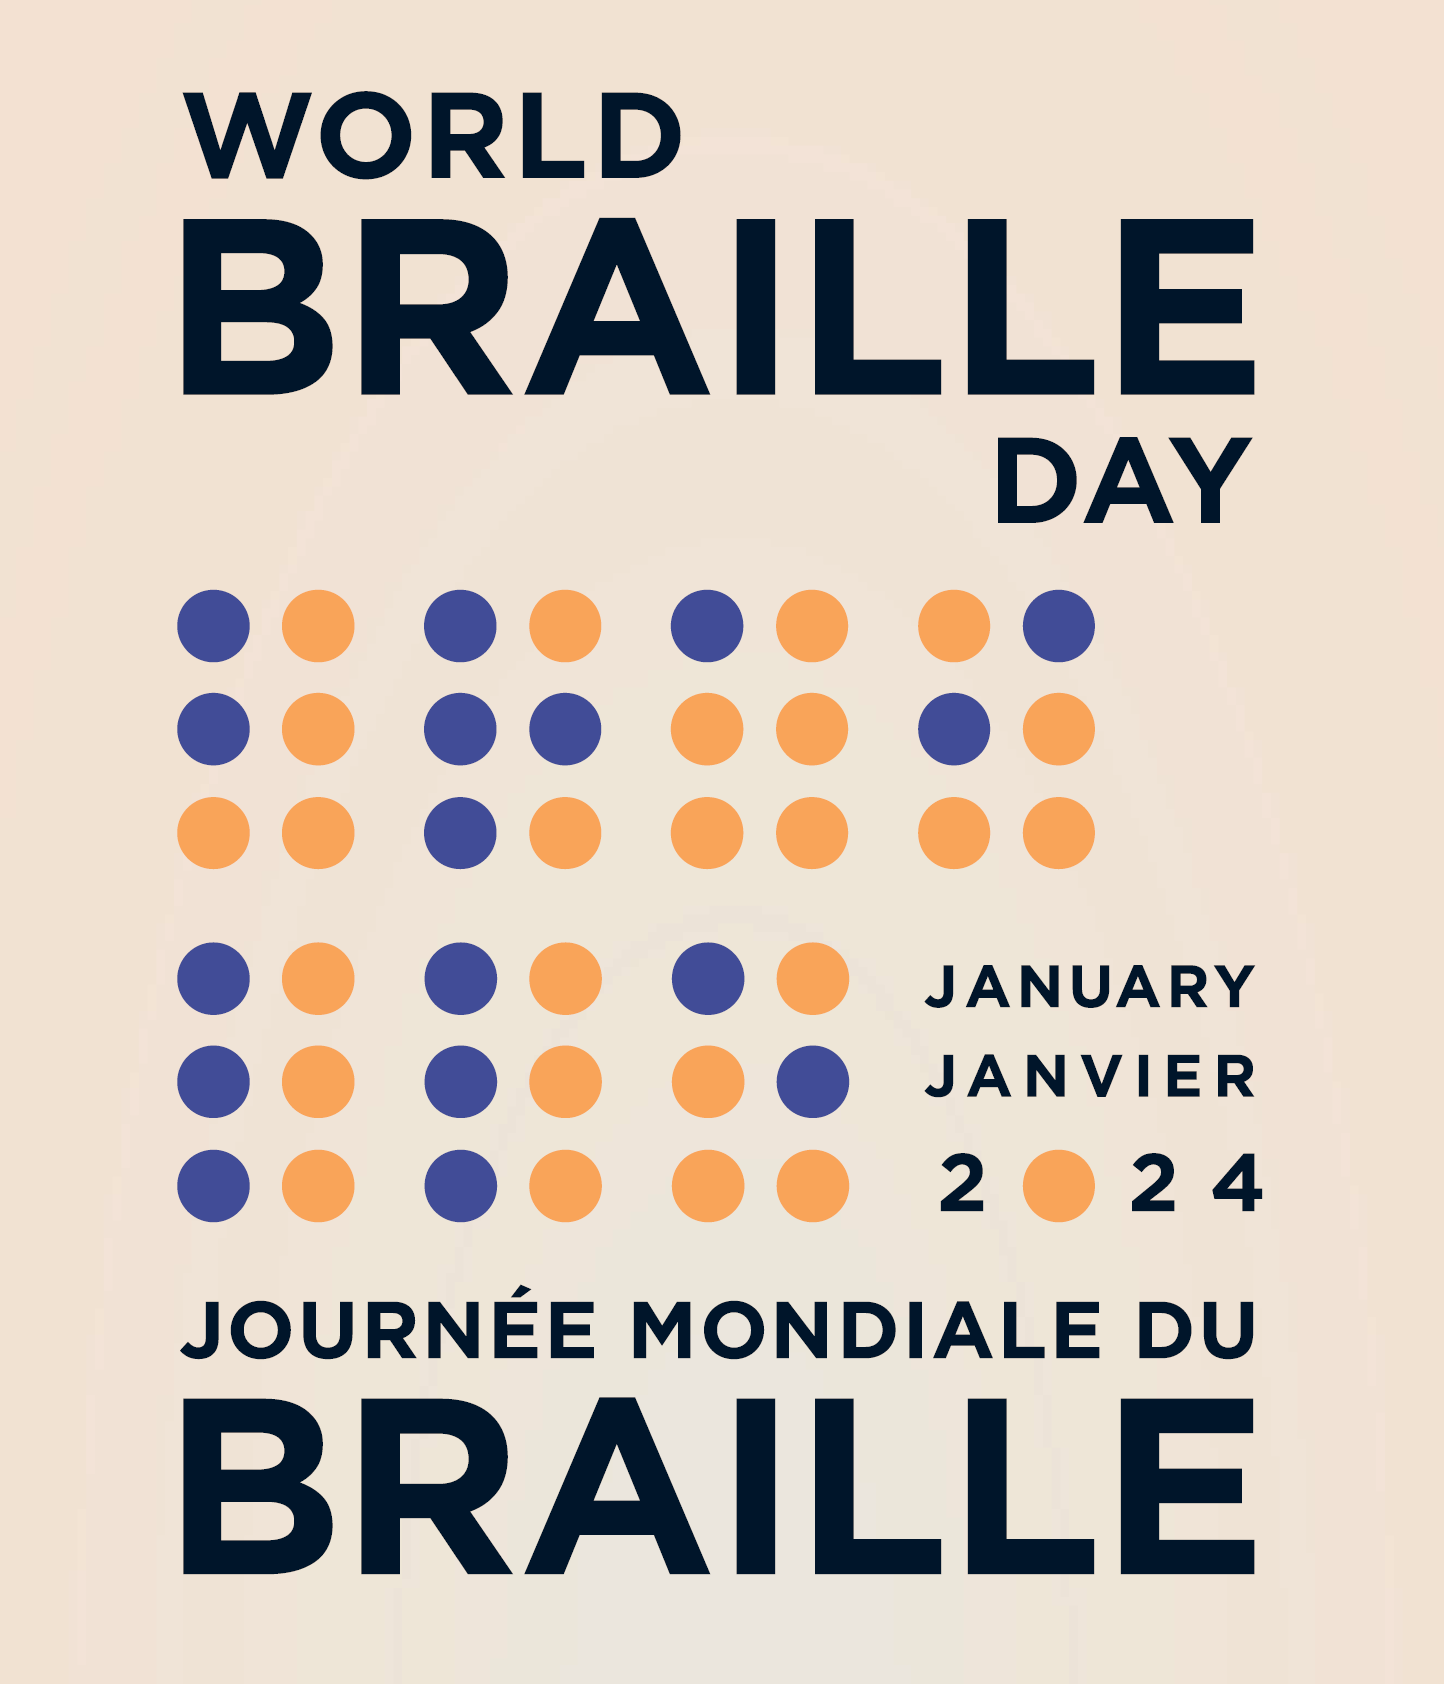 A graphic showing the words: World Braille Day January 2024